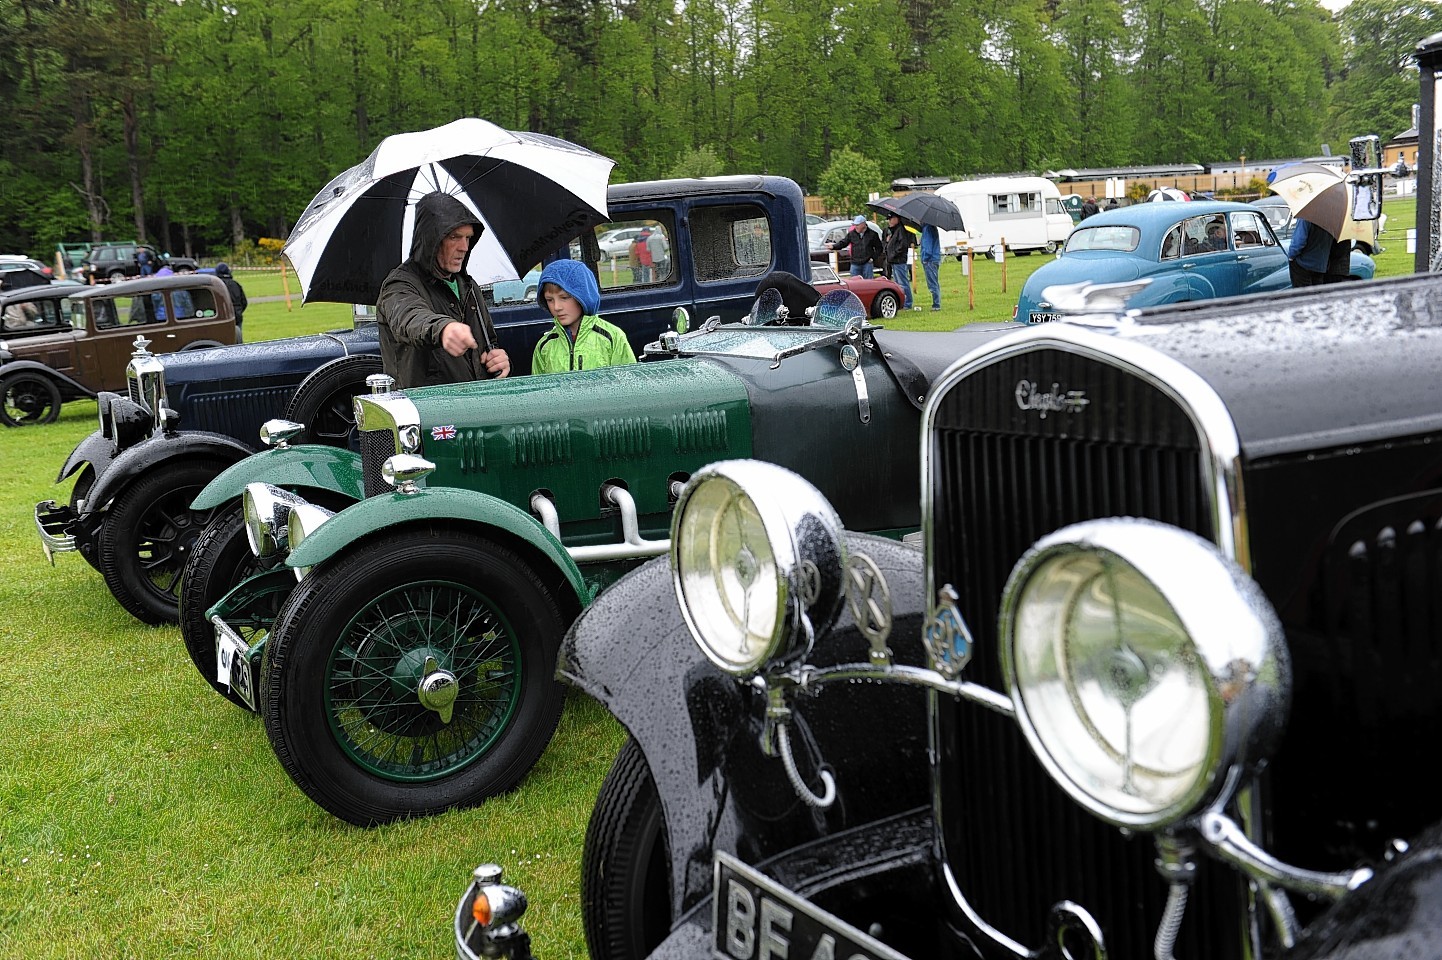 Crathes Vintage Car and Motorcycle Rally 2015